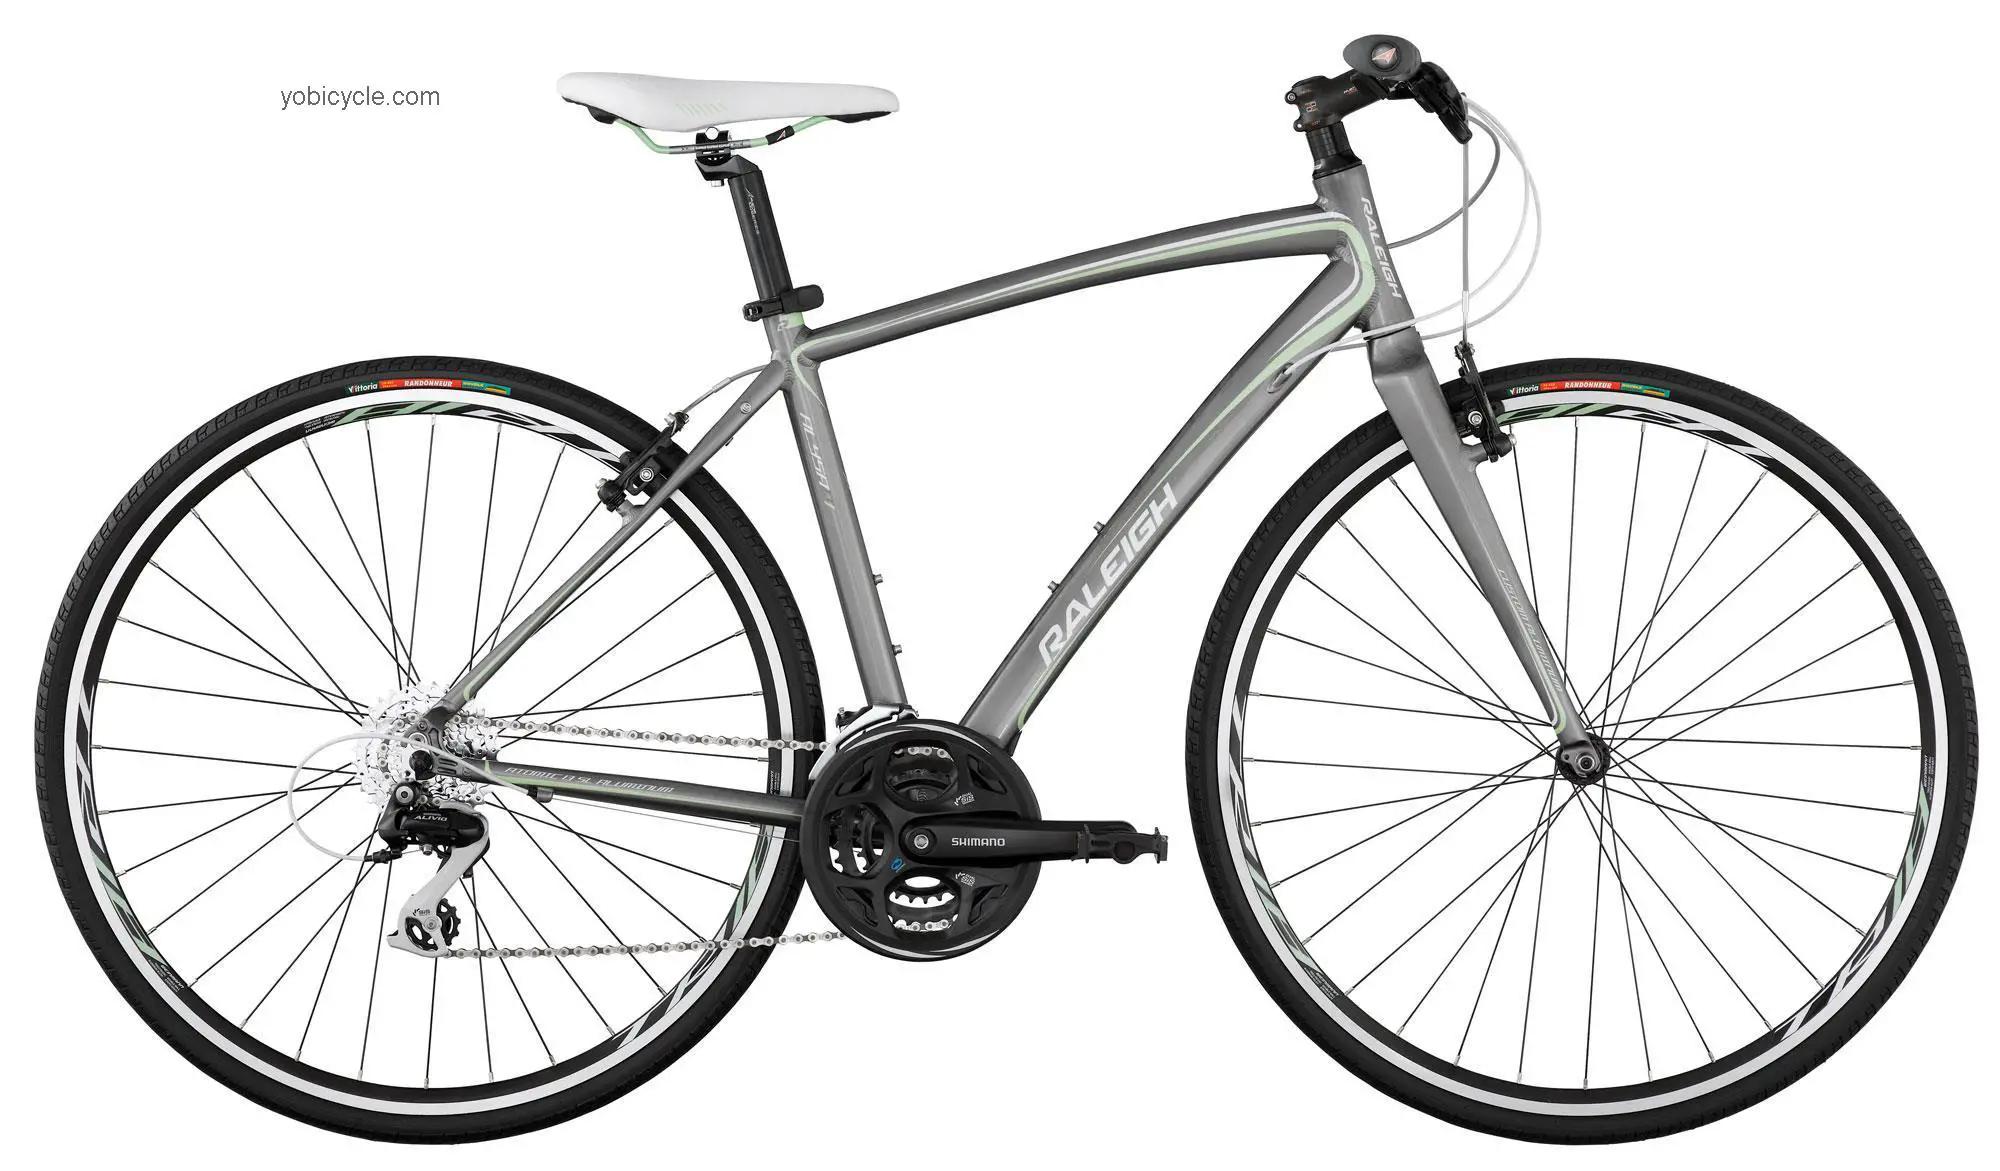 Raleigh Alysa FT1 2012 comparison online with competitors